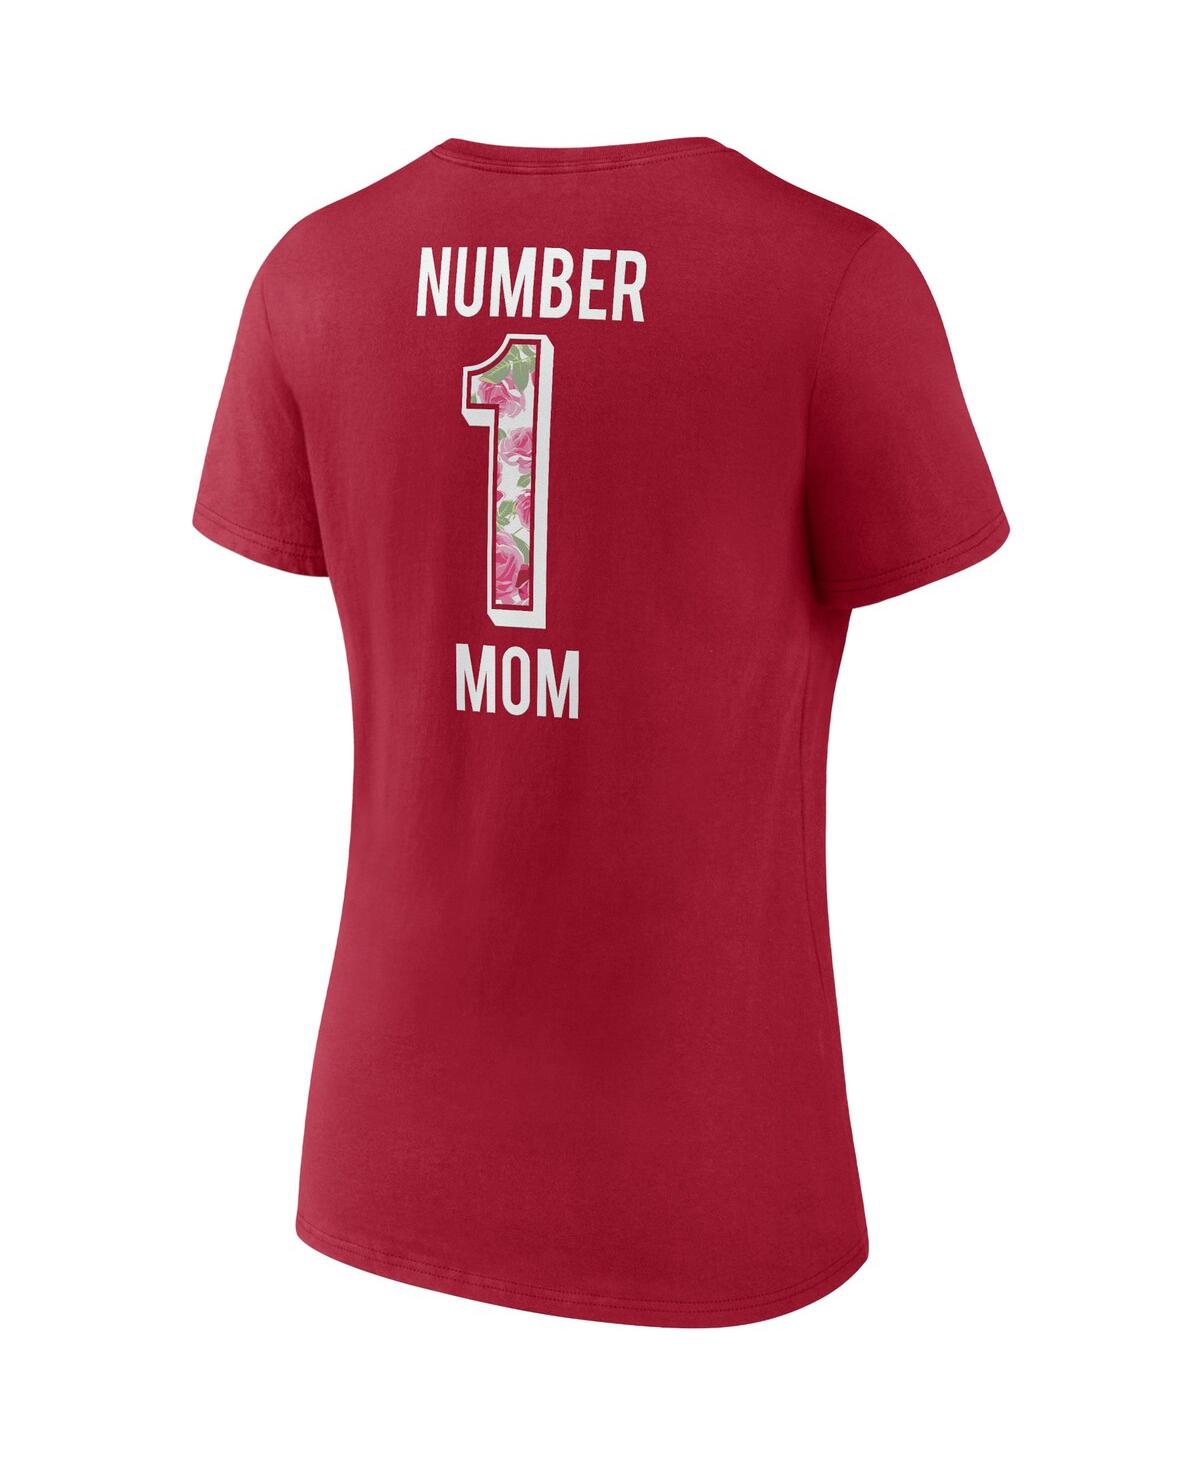 Women's Fanatics Branded Red Washington Nationals Mother's Day V-Neck T-Shirt Size: Small